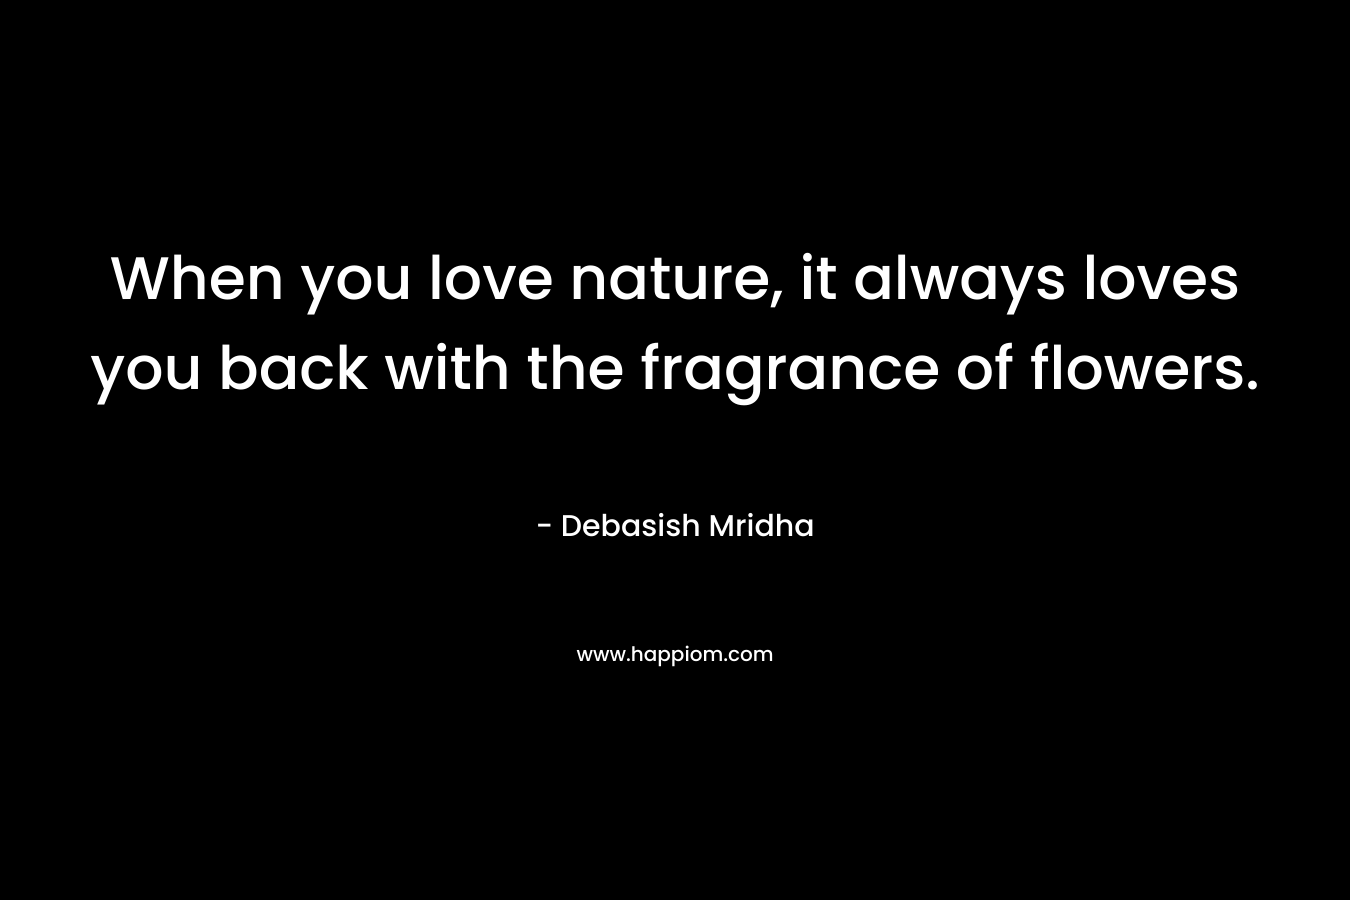 When you love nature, it always loves you back with the fragrance of flowers. – Debasish Mridha